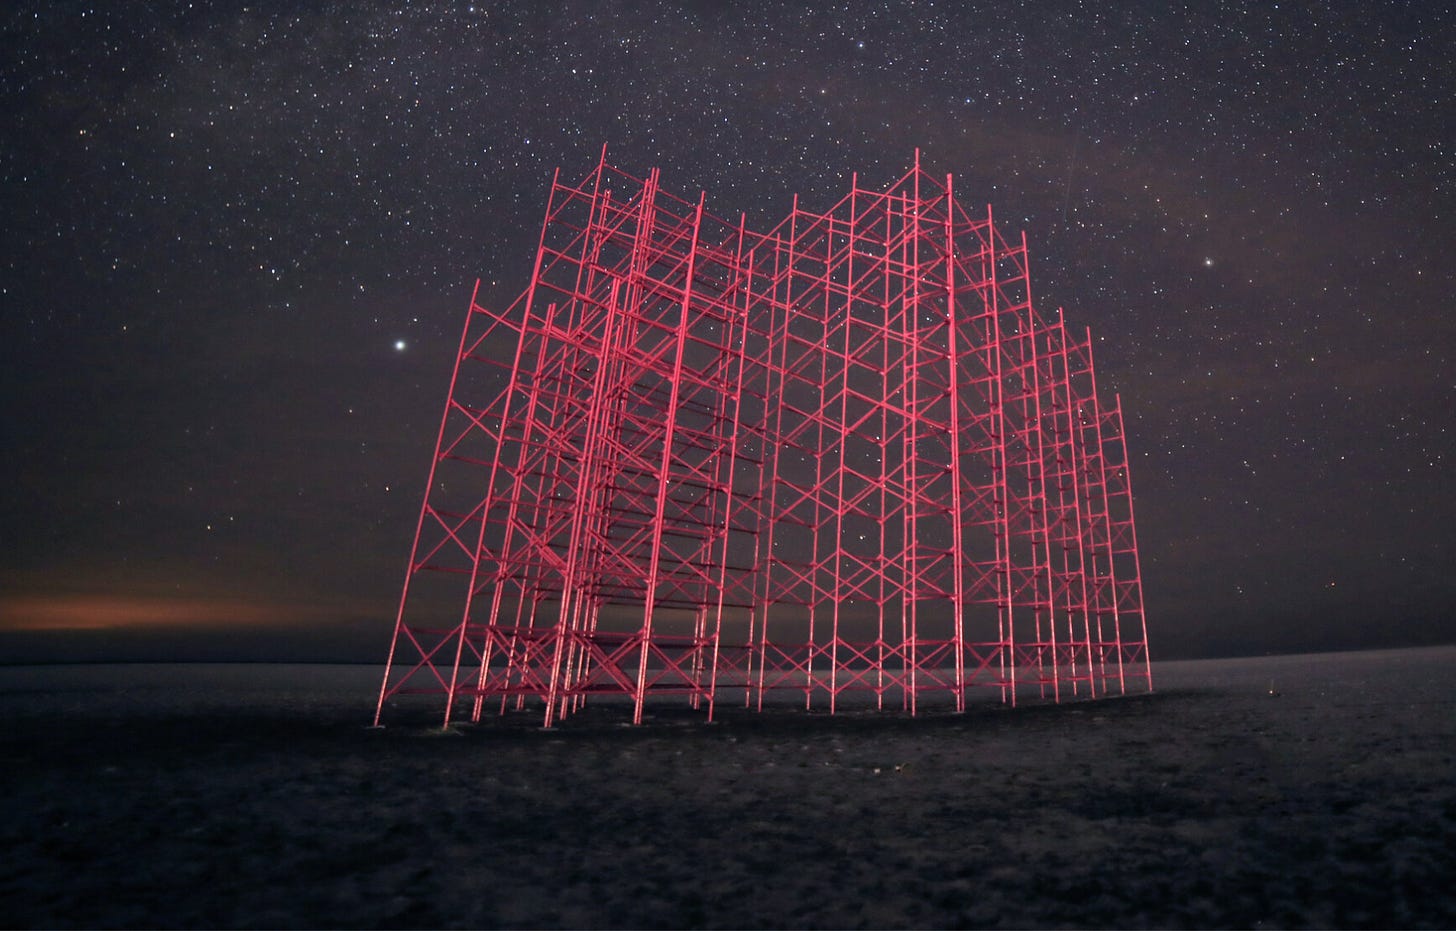 A 40-ft hot pink scaffolding lit up at night with a starry black sky behind it.